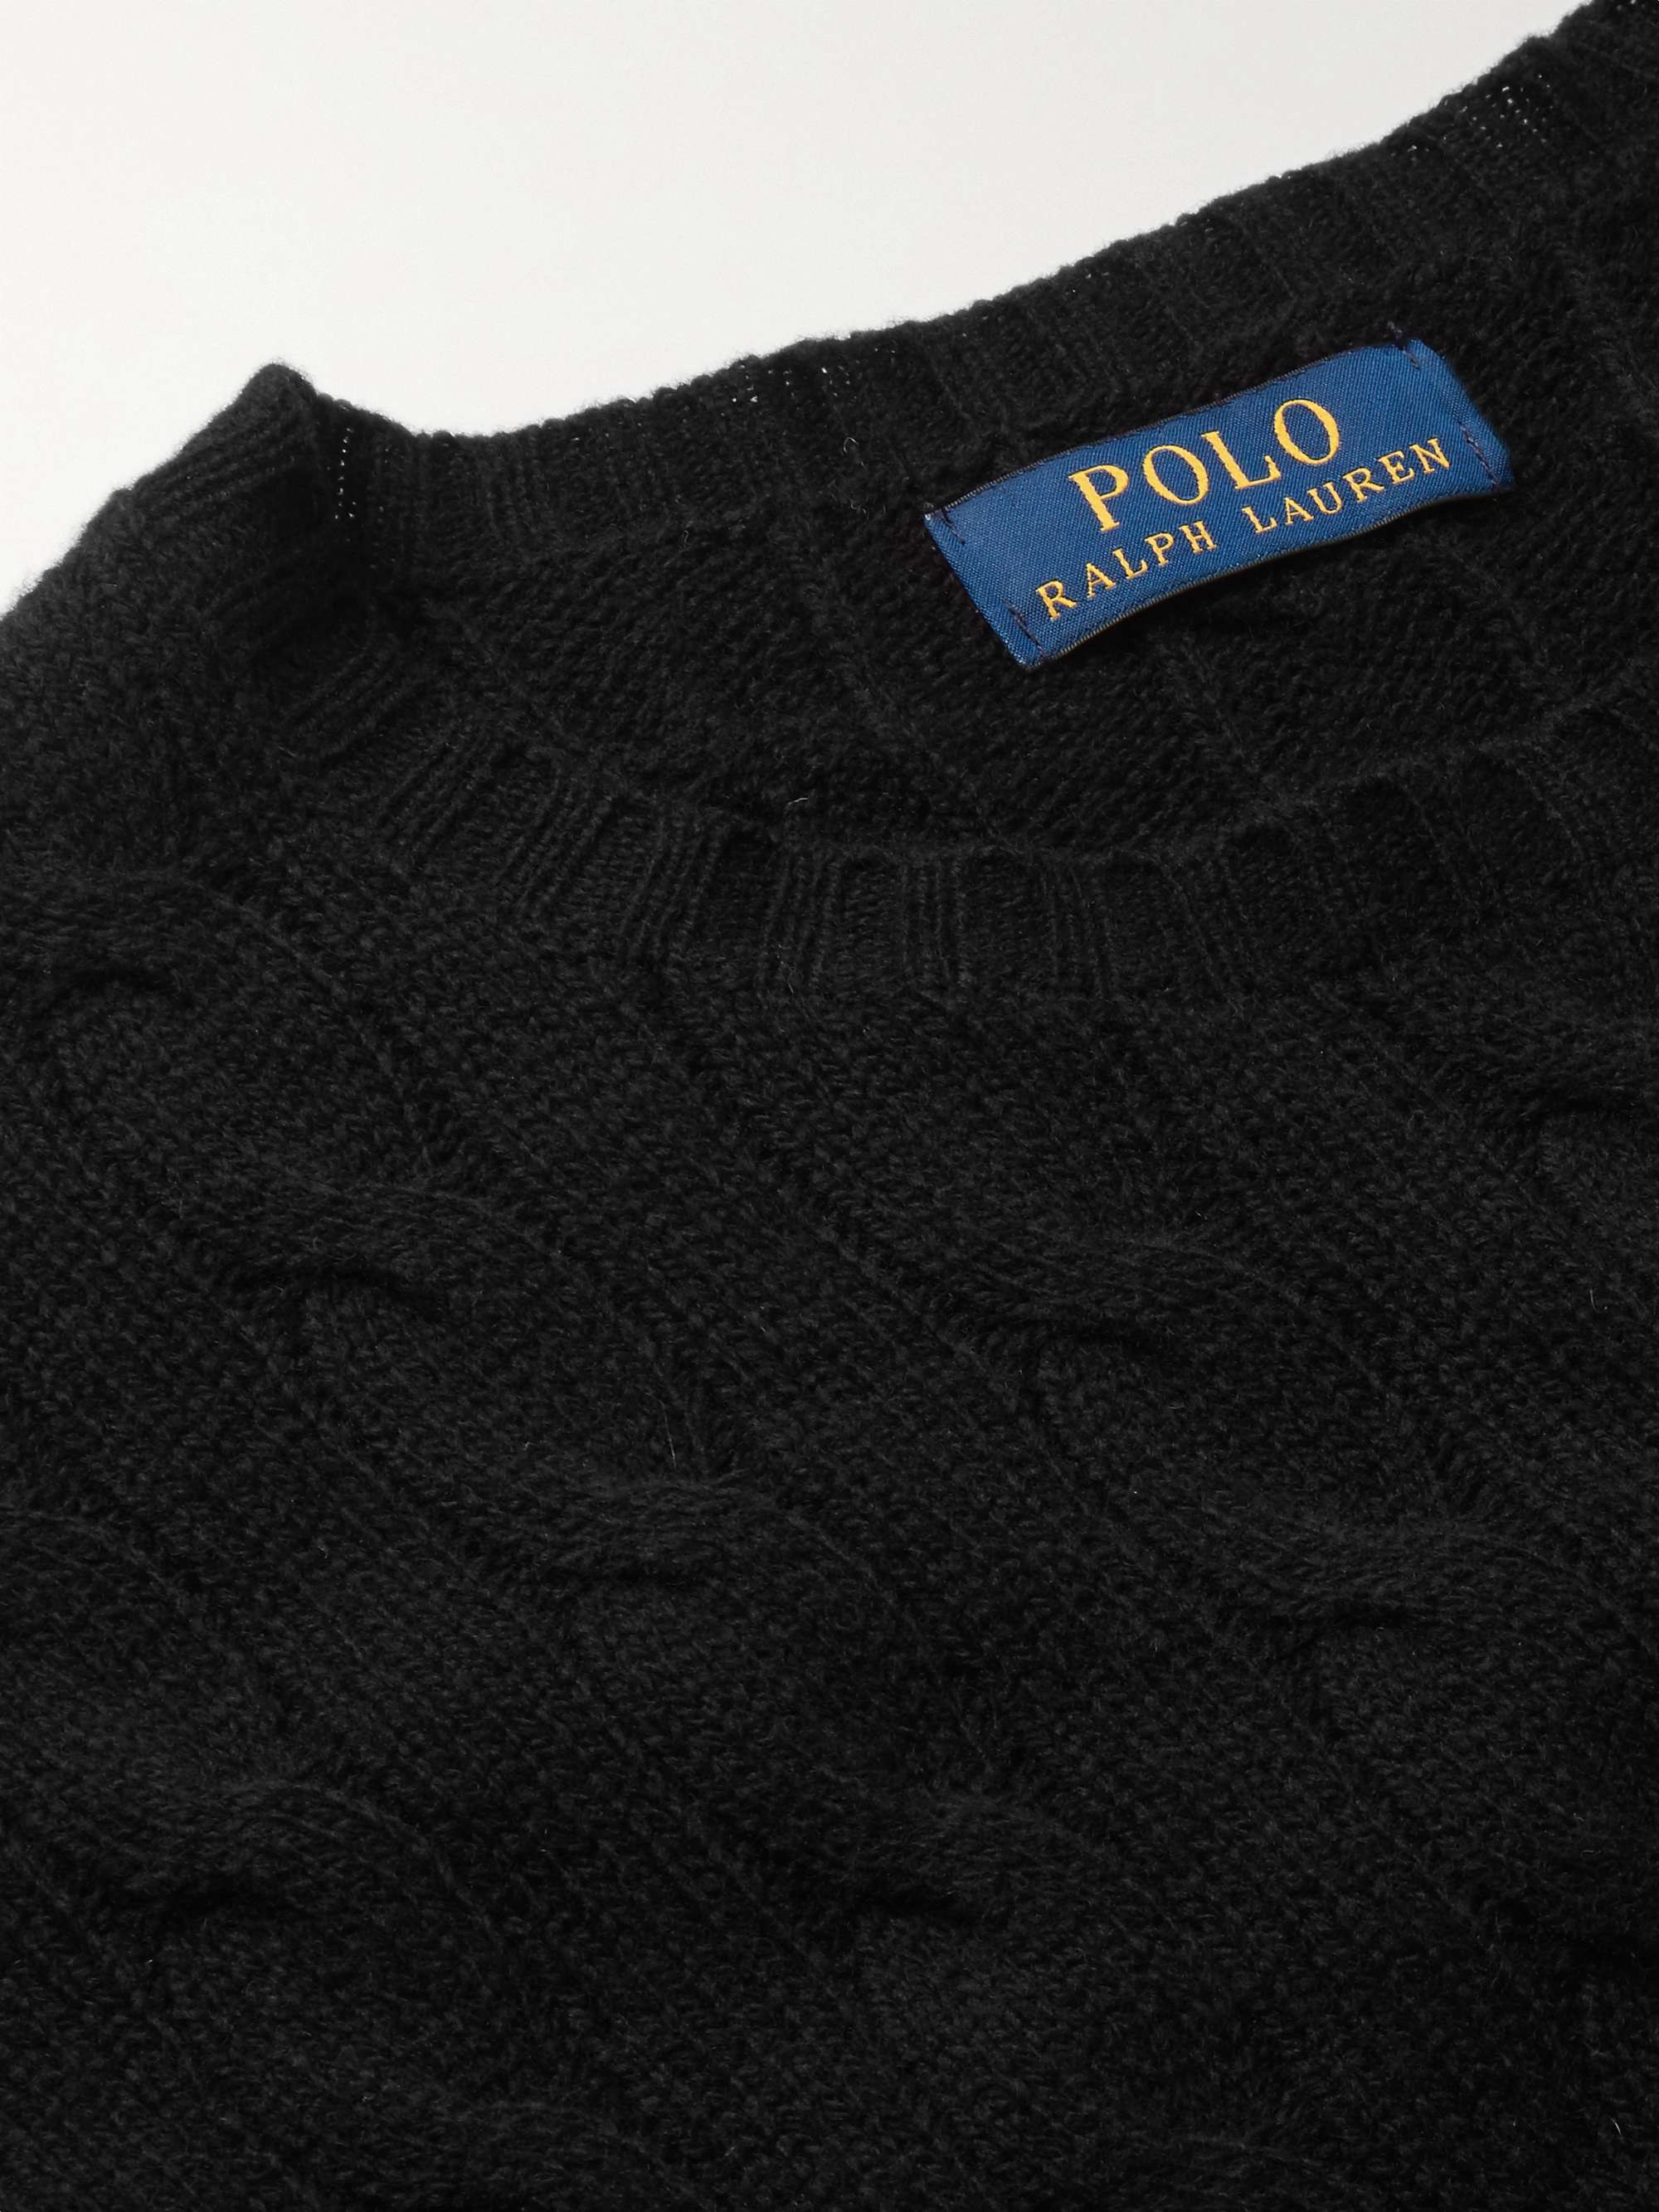 POLO RALPH LAUREN Cable-Knit Merino Wool and Cashmere-Blend Sweater